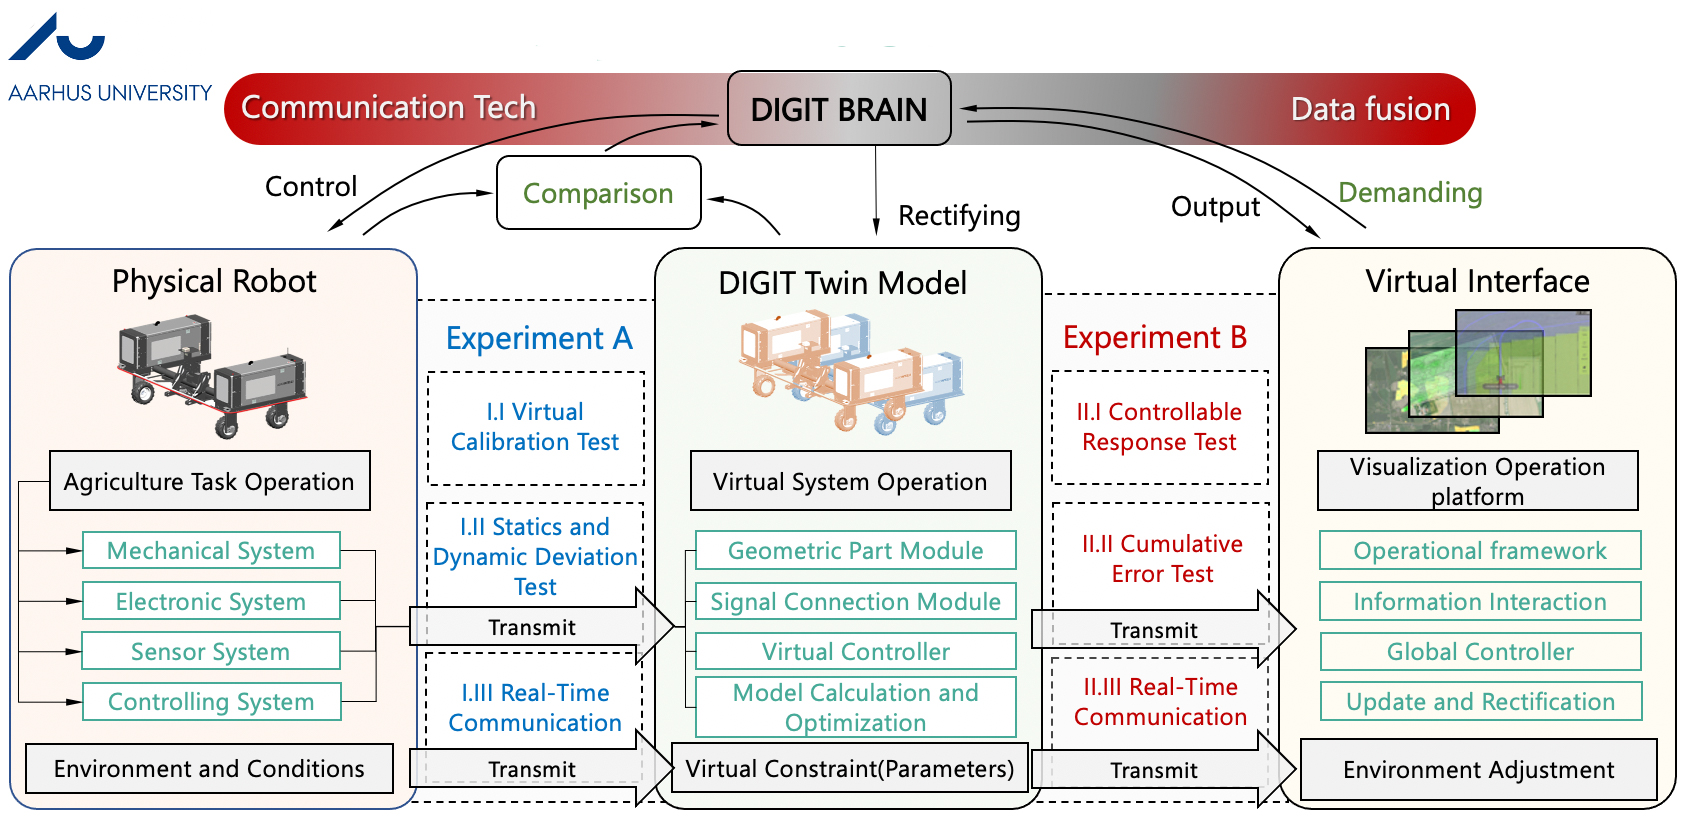 Technical Image of the DIGITbrain Experiment no. 6